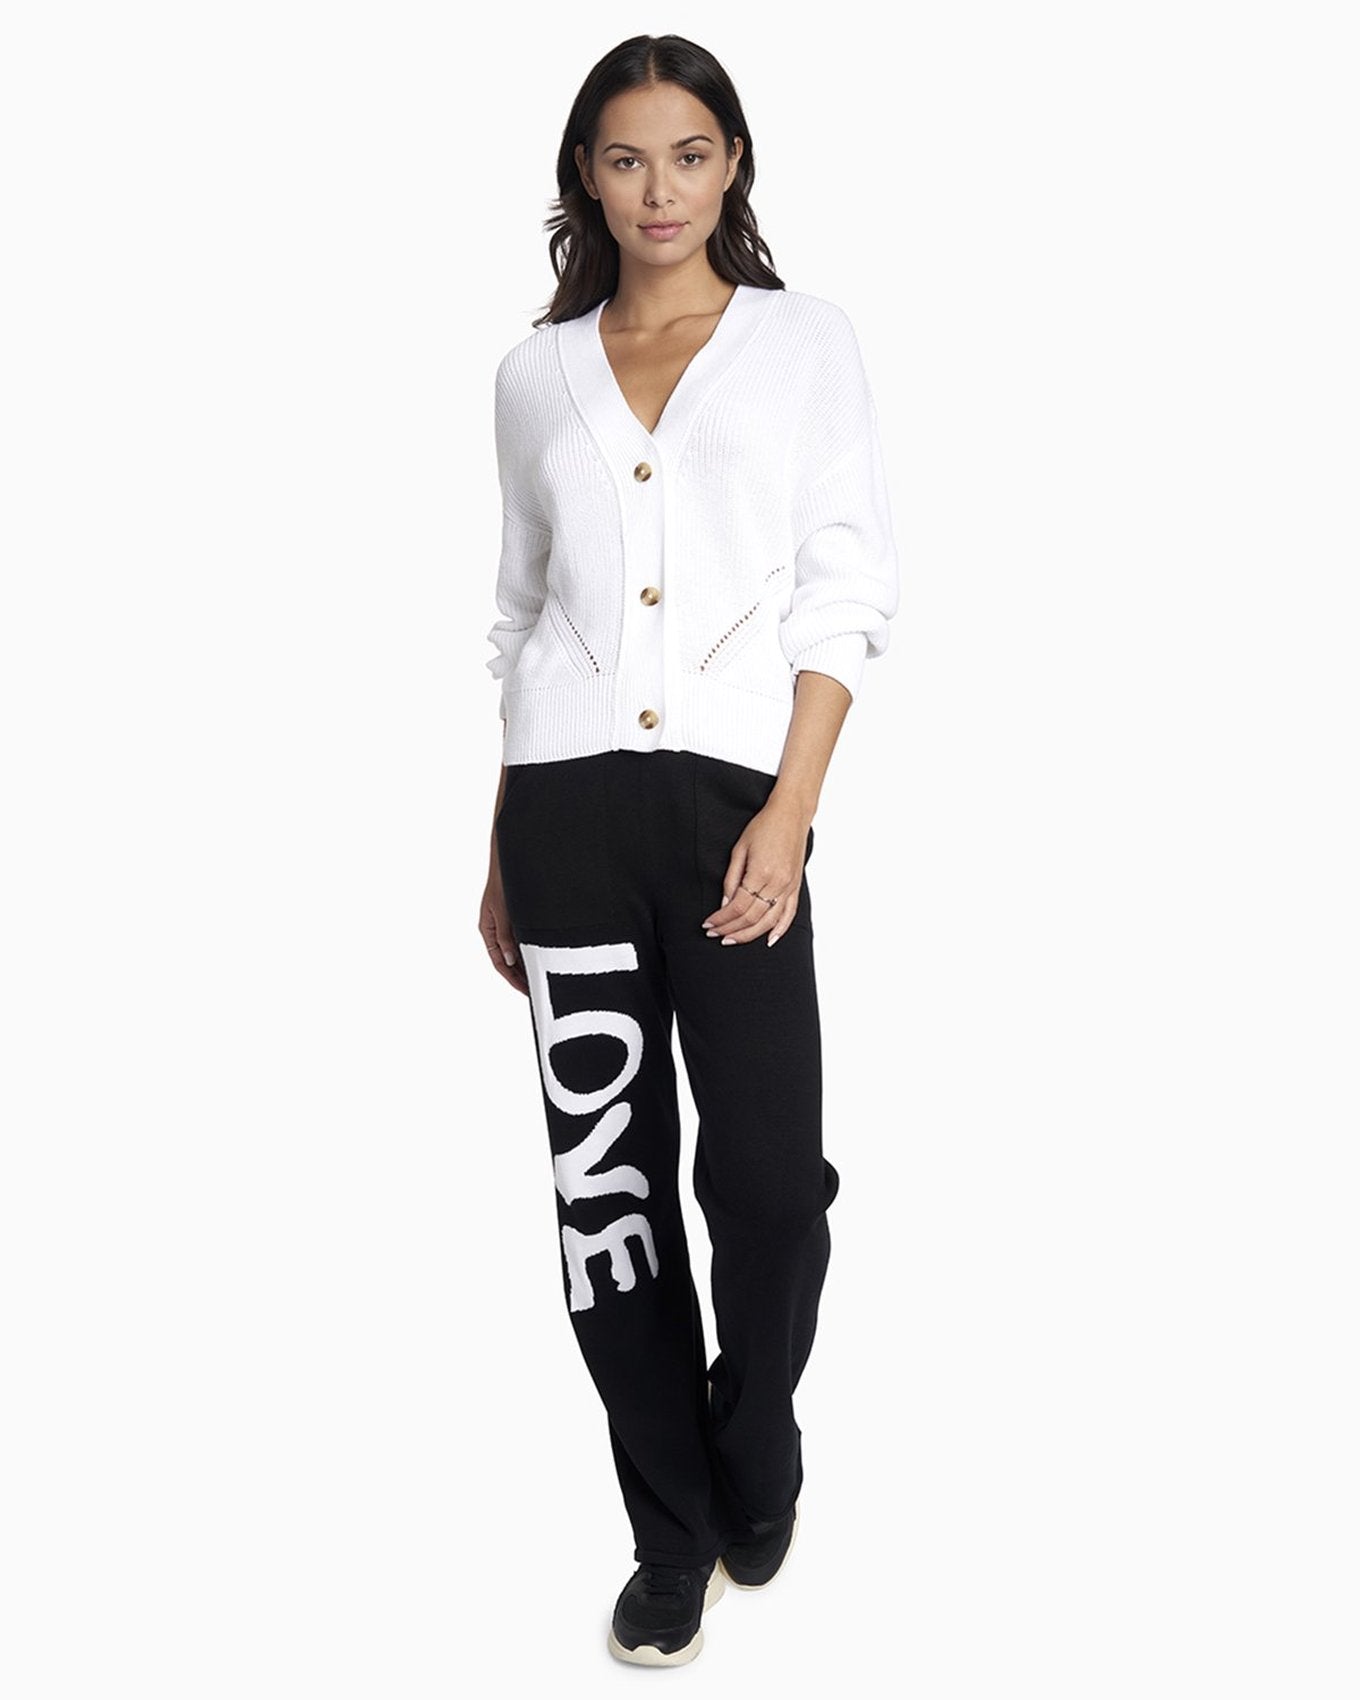 YesAnd Organic Knit Pant Knit Pant in color White Love on Black and shape pants